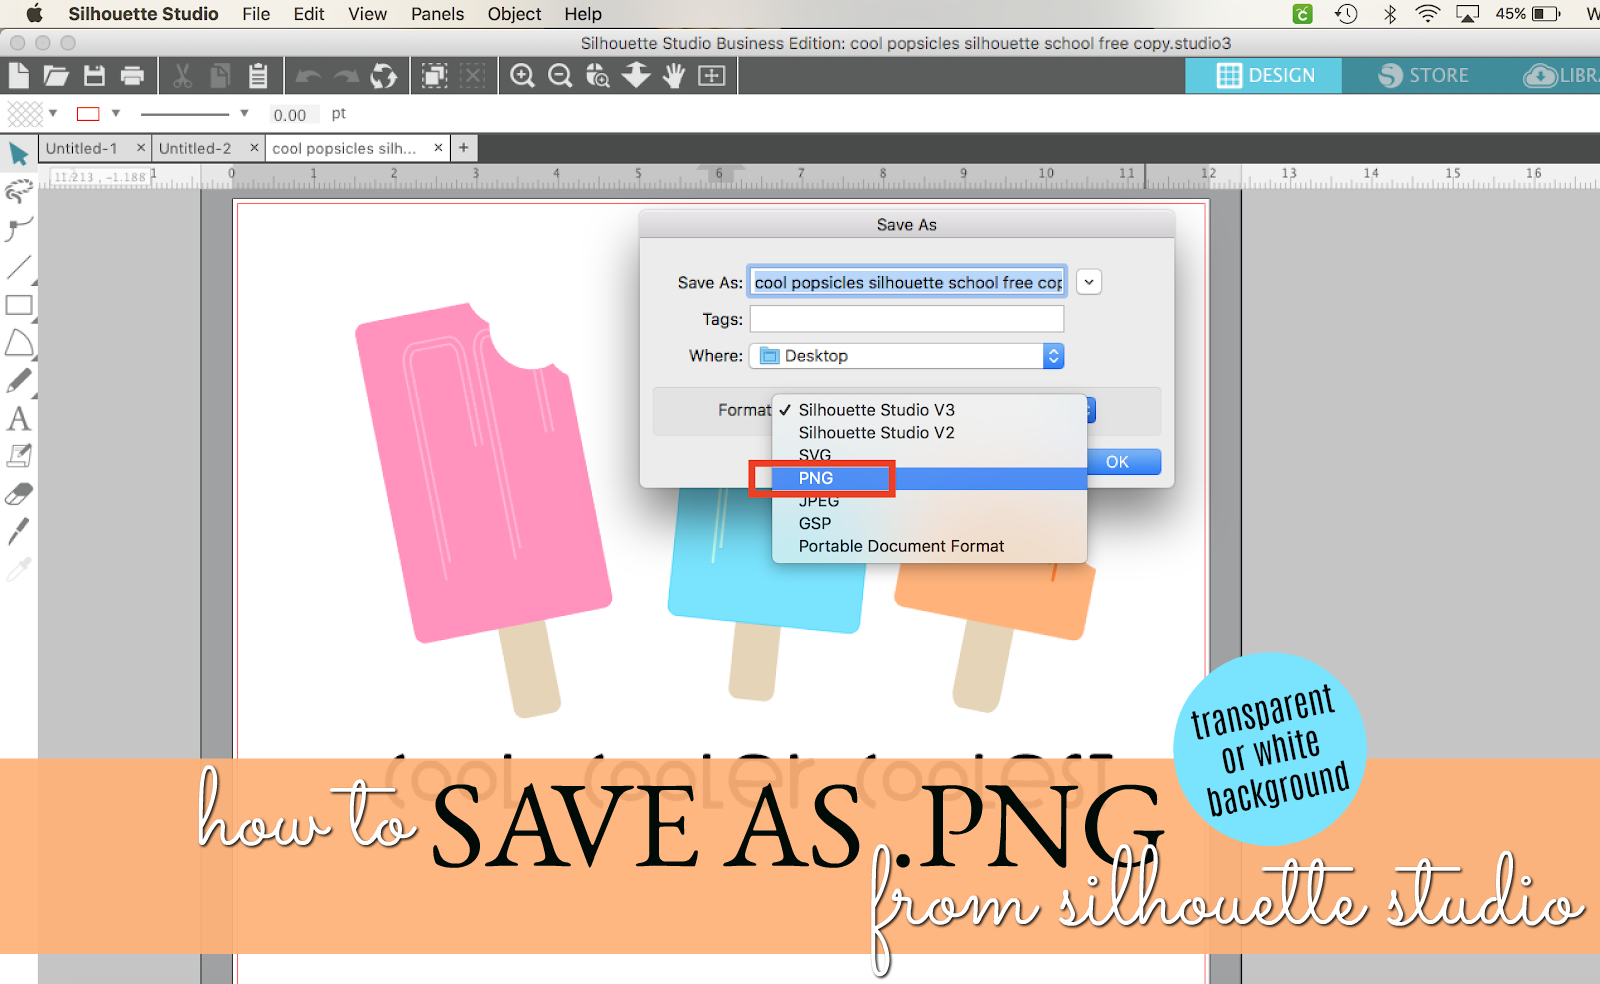 Download How to Save as PNG from Silhouette Studio (V4.2 Series) - Silhouette School